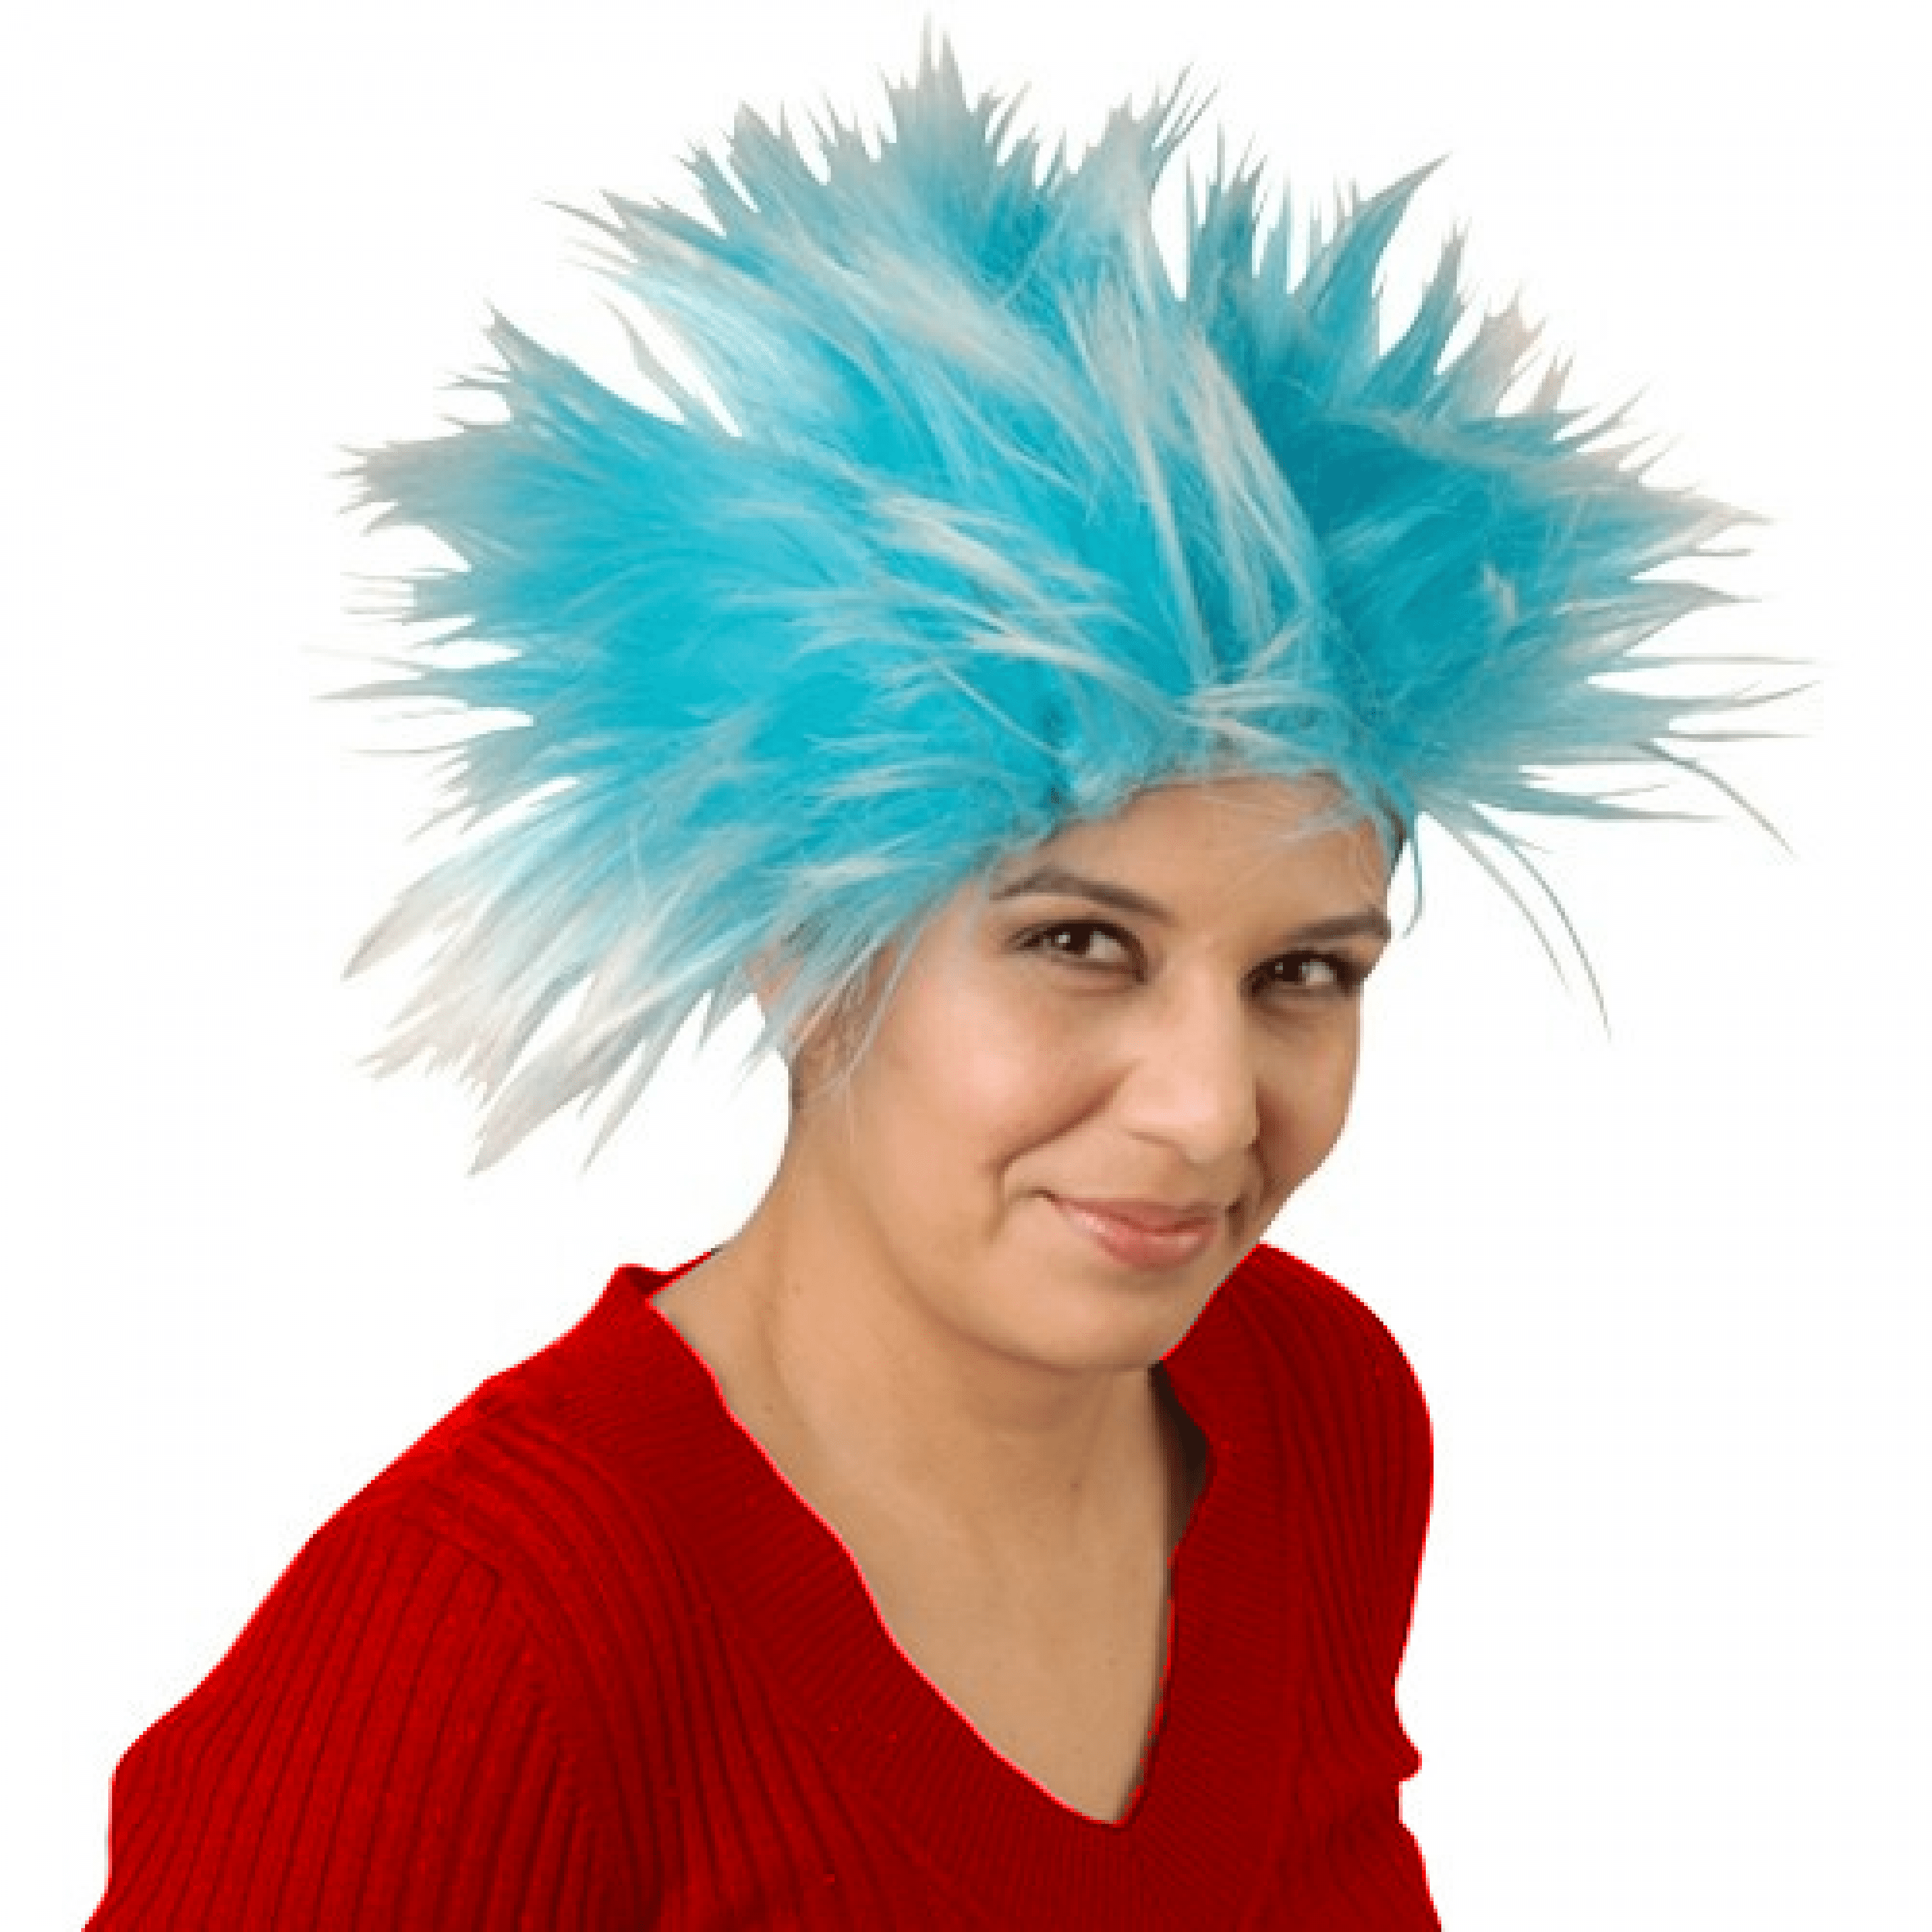 Kids Thing 1 or Thing 2 Style Blue Curly Wig 